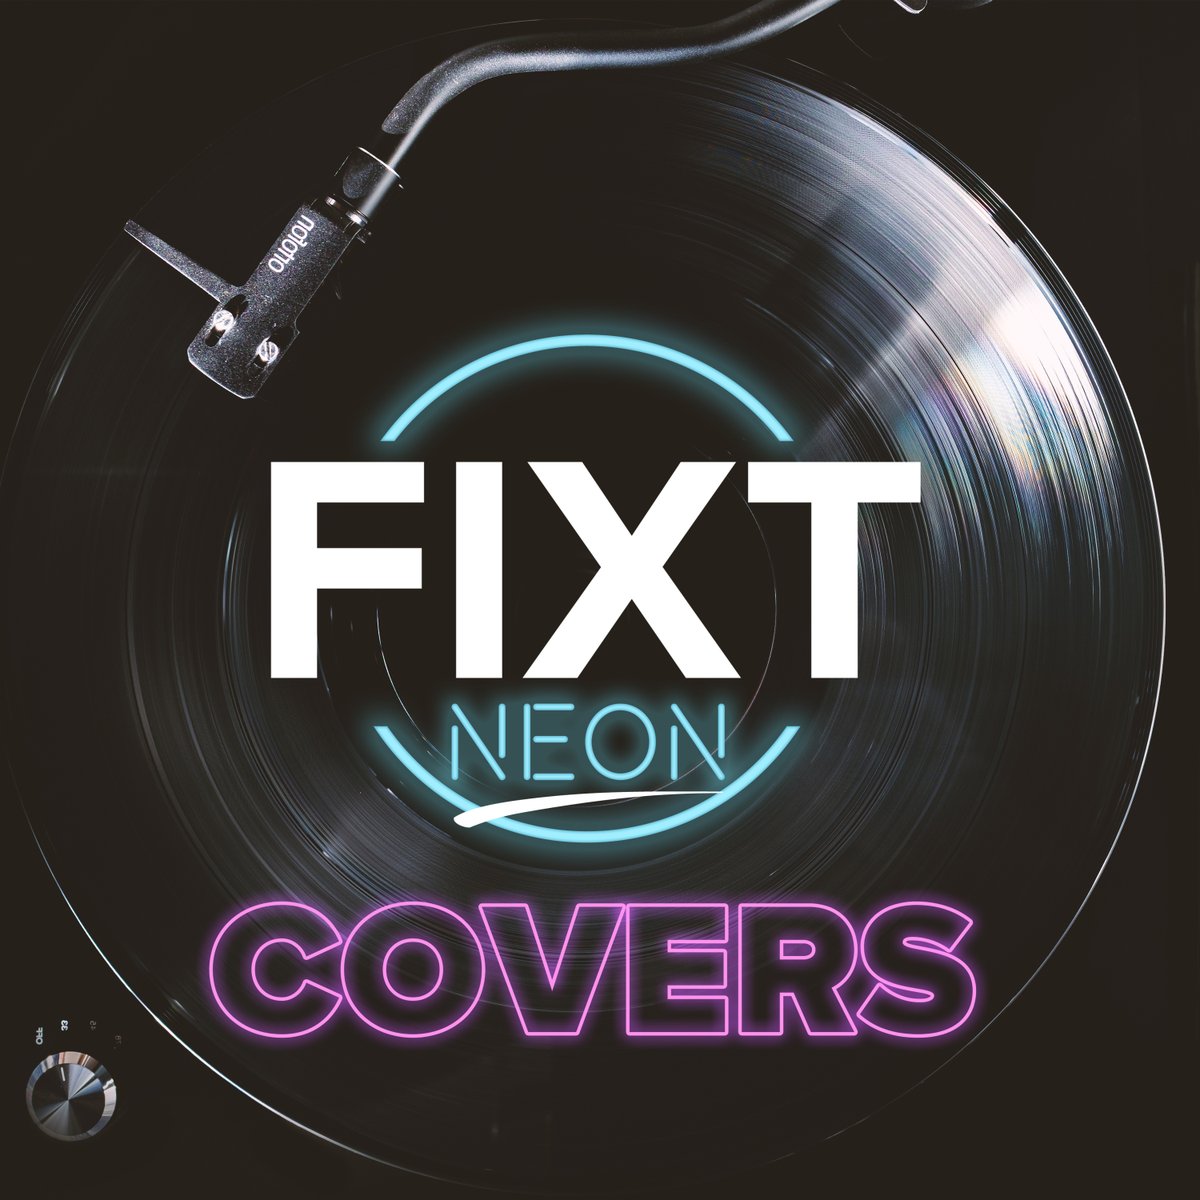 From MJ's “Thriller” cover from @ScandroidMusic a synth-heavy re-imagining of the Death Stranding theme from @3FORCEofficial & a cybernetic touch to Pink Floyd’s 'Another Brick in the Wall' by @FuryWeekend FiXT Neon’s: Covers playlist has got you covered open.spotify.com/playlist/1463R…?